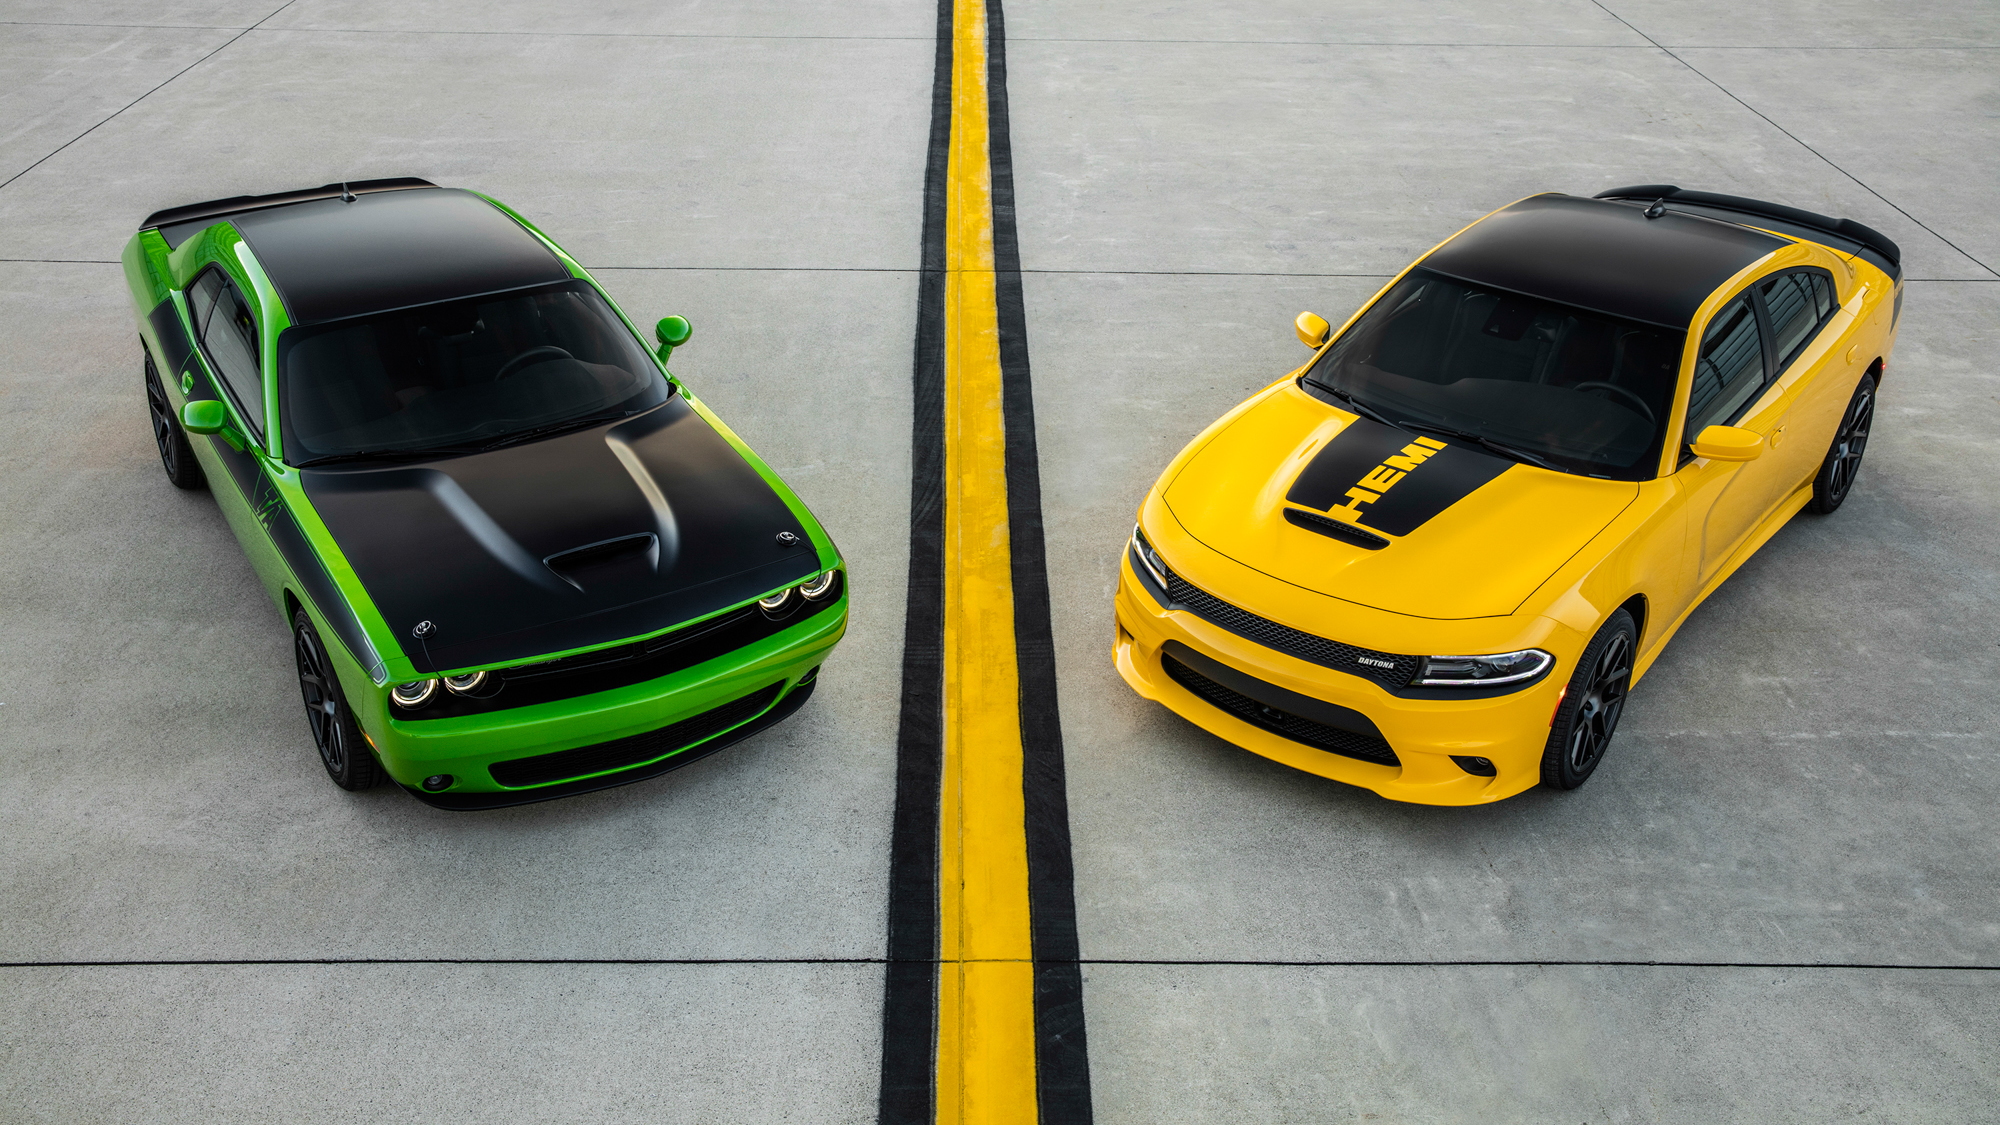 Dodge shows off its updated 2017 Challenger and Charger lineup